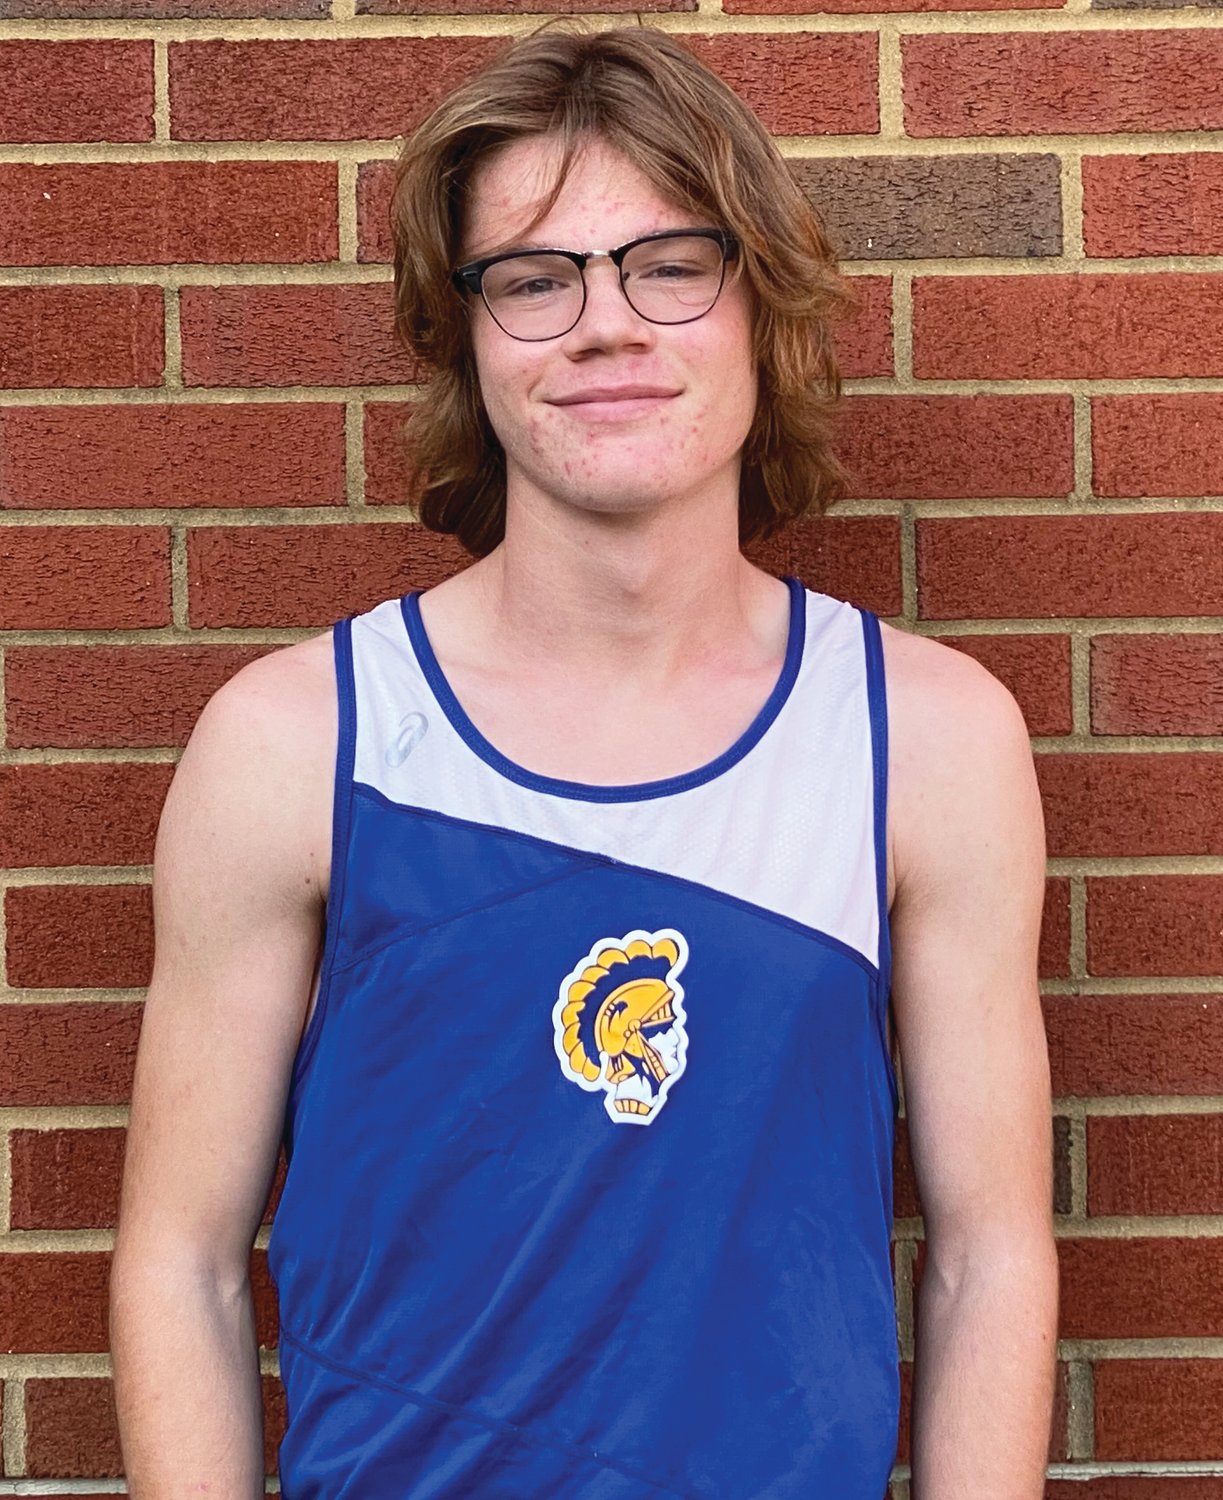 Crawfordsville senior Hunter Hutchison is the 2020 Journal Review Boys Cross Country Runner of the Year.